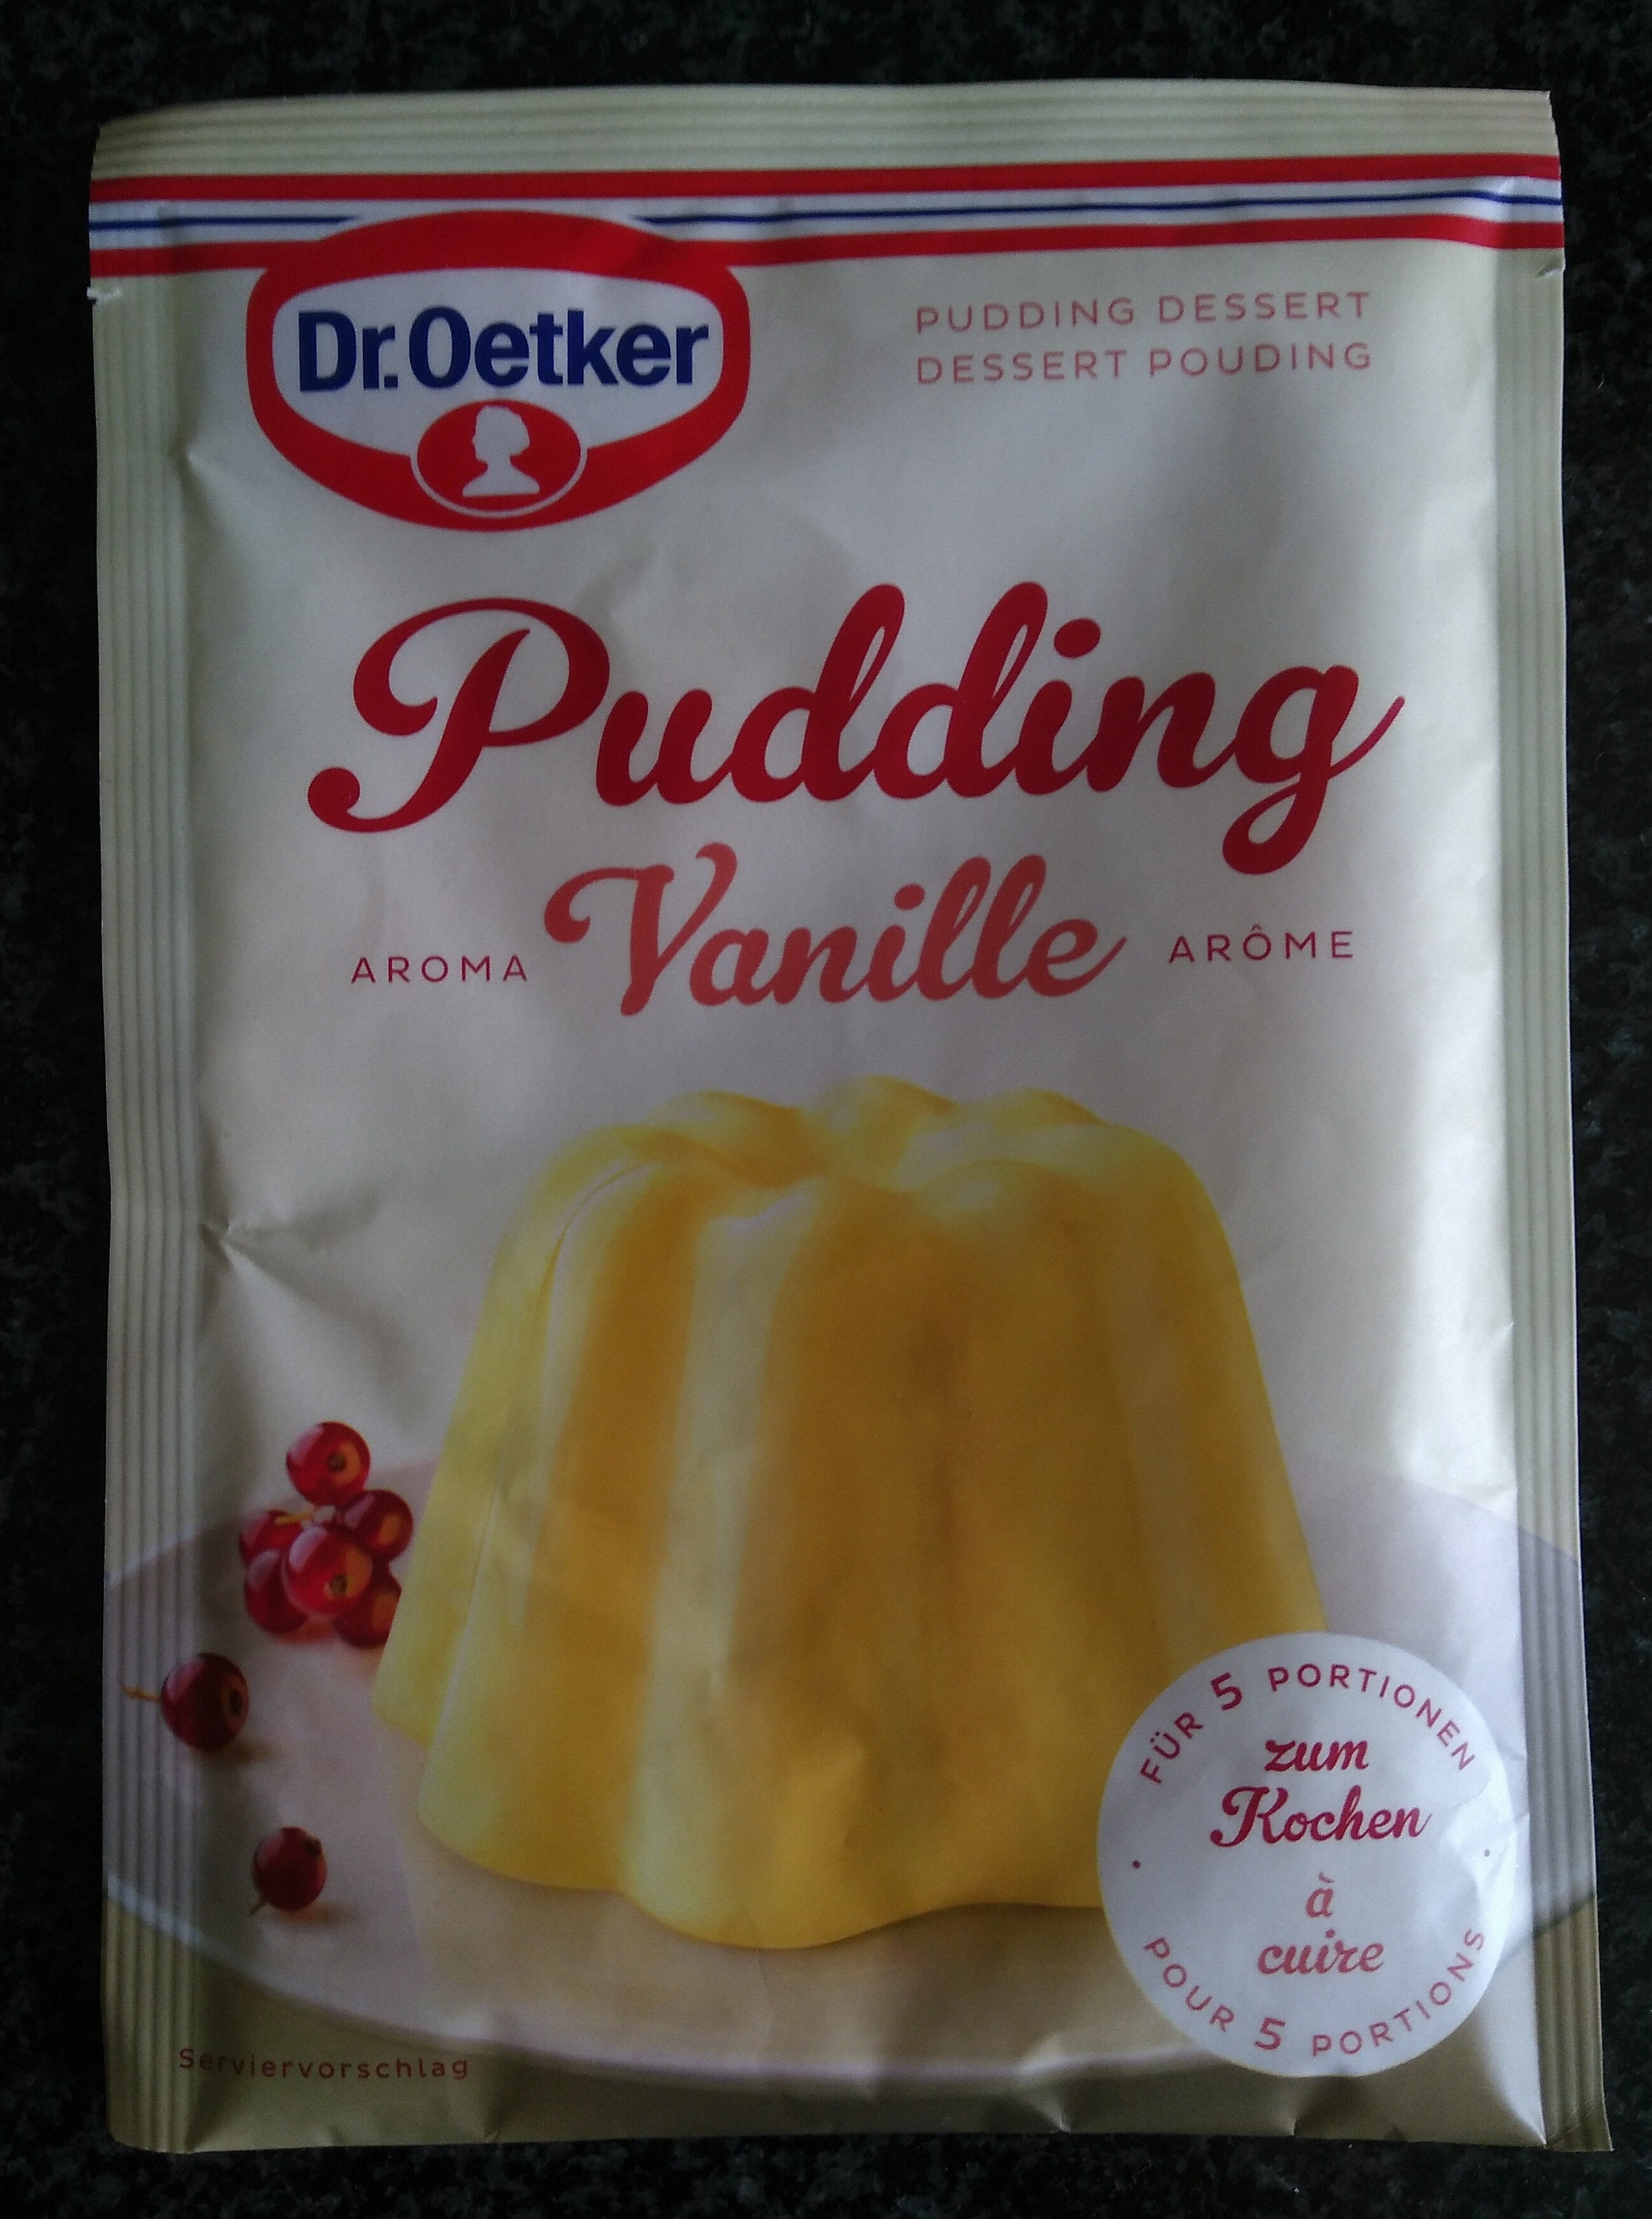 Pudding arôme vanille - Product - fr